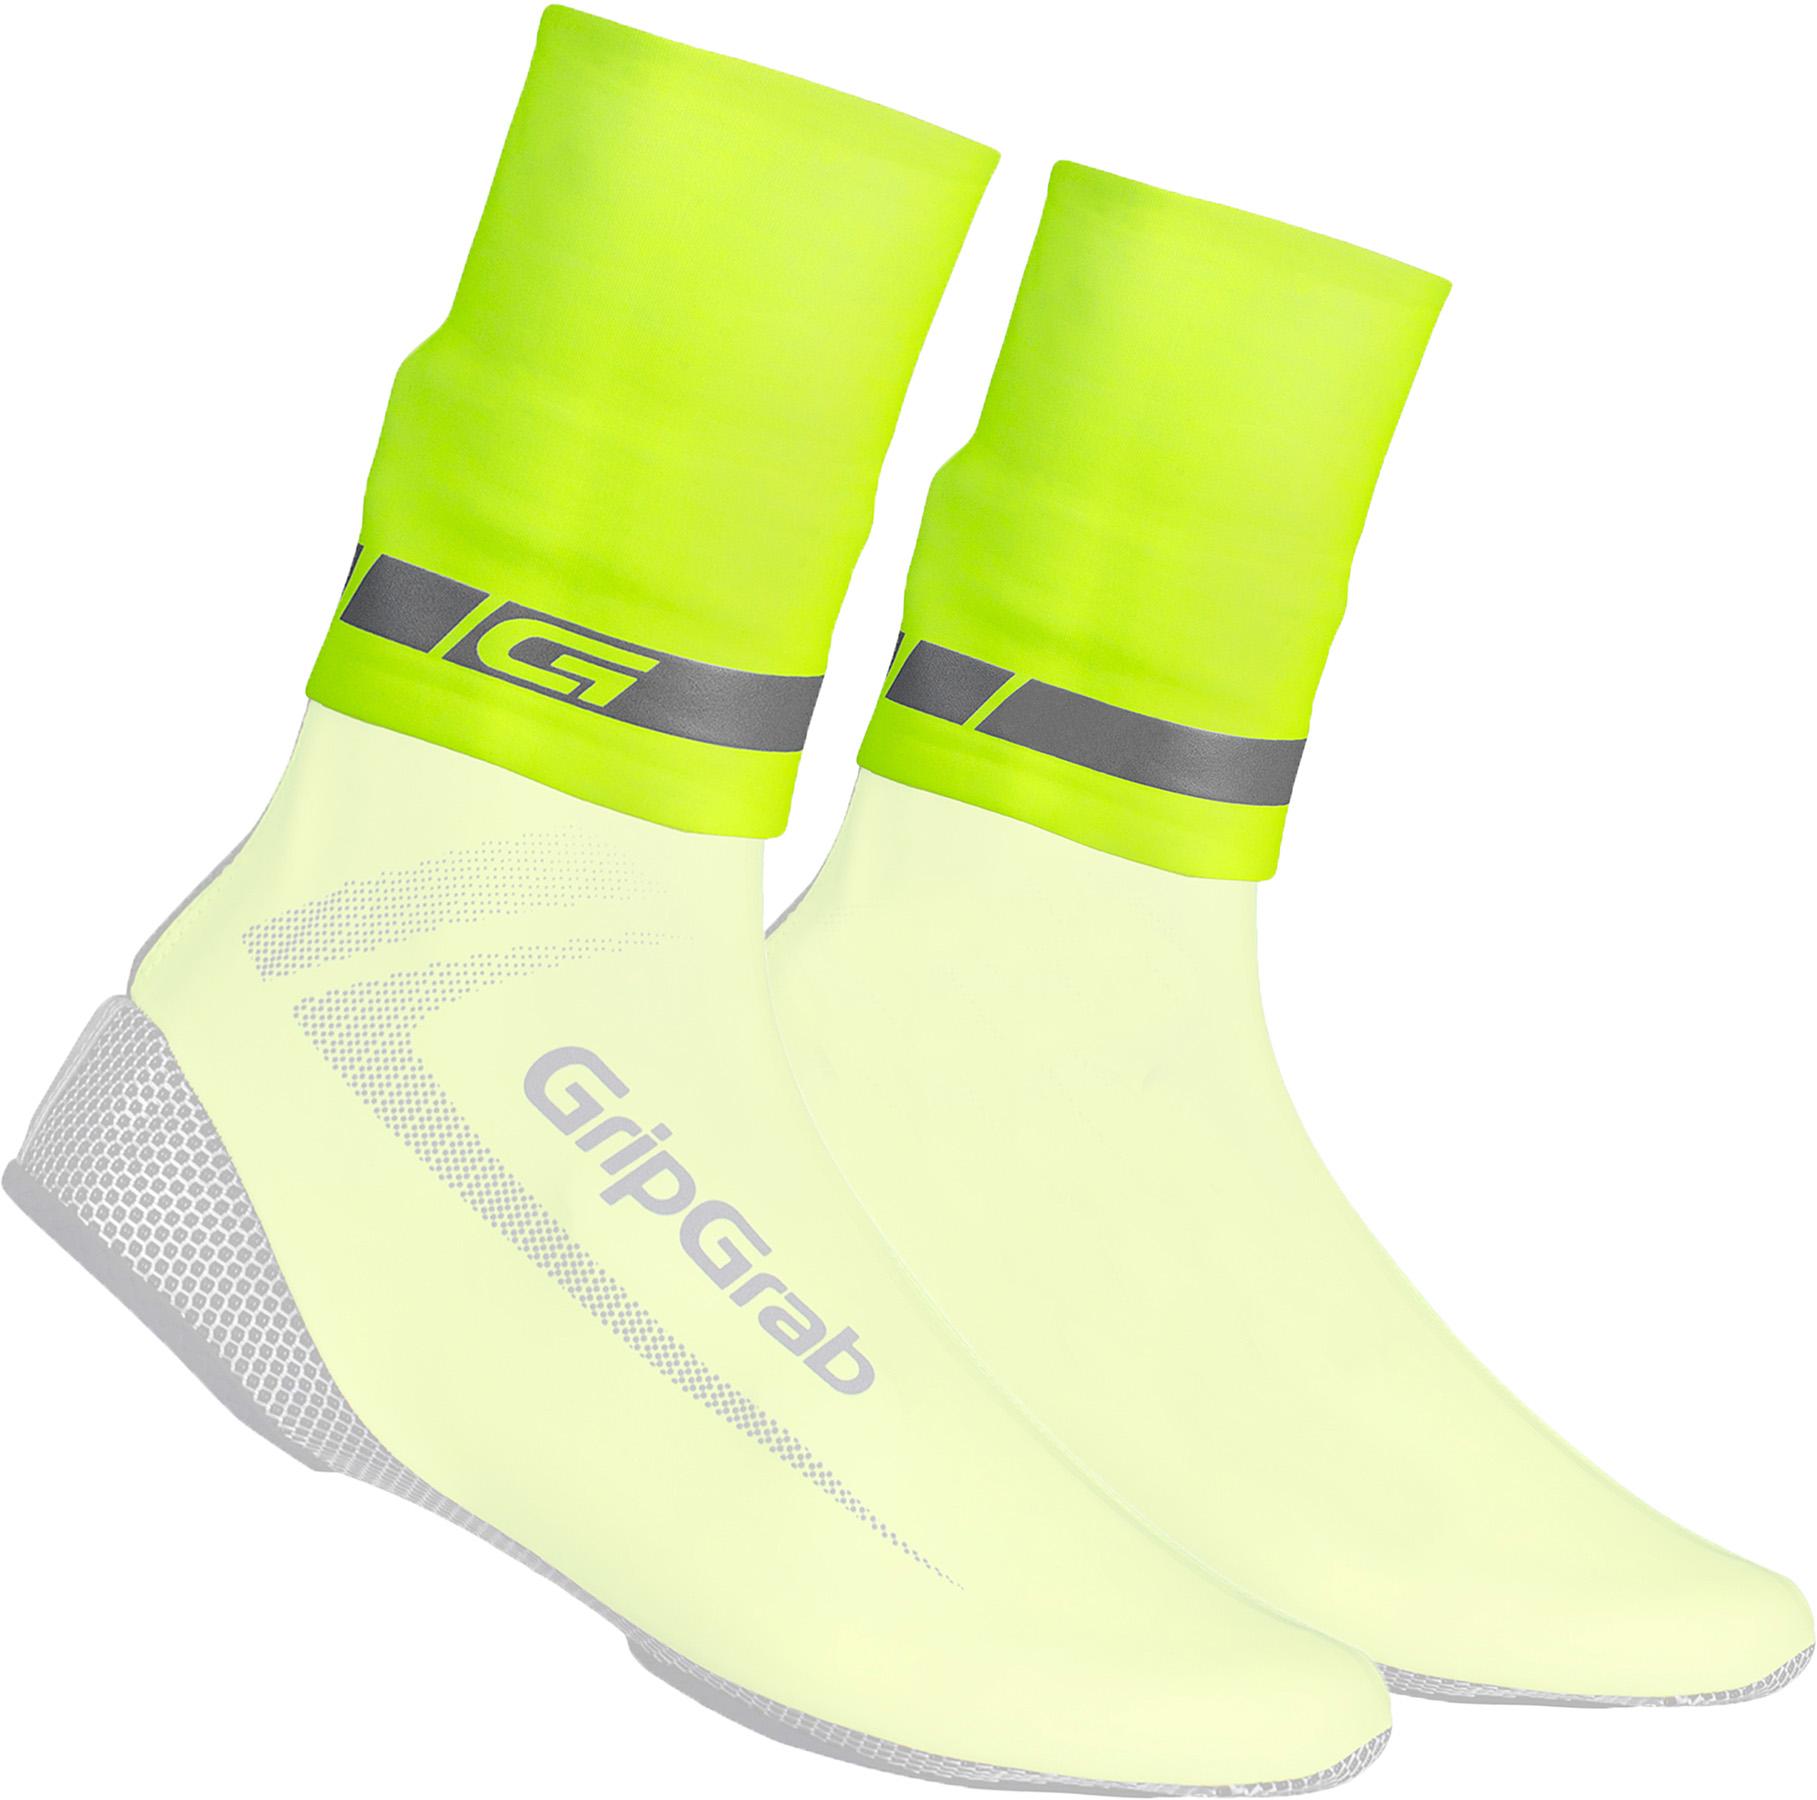 Gripgrab Cyclingaiter Hi-vis Rainy Weather Ankle Cuff - Fluorescent Yellow